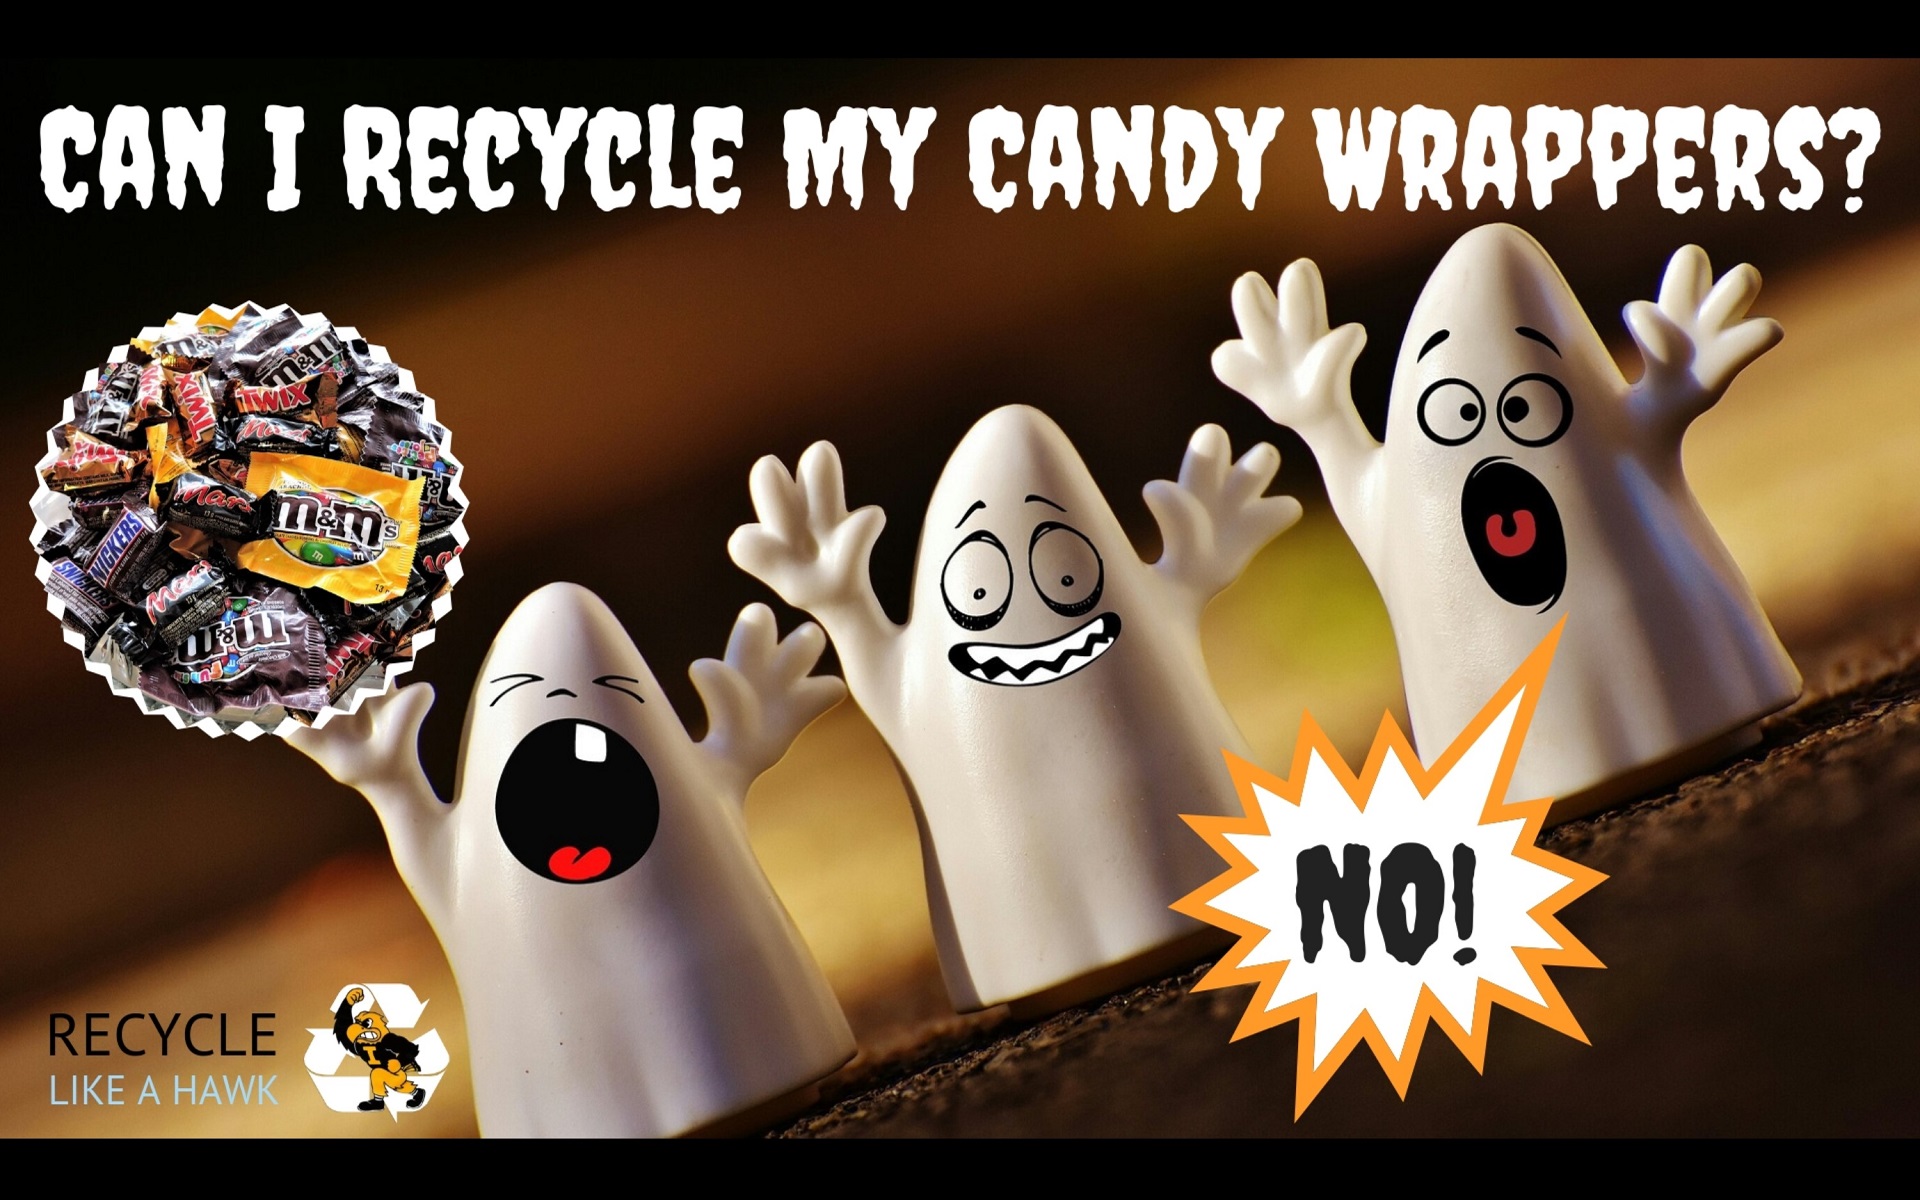 Can I recycle candy wrappers? No! (Scream 3 cutesy ghosts - hands up in alarm; one of whom only has on tooth))